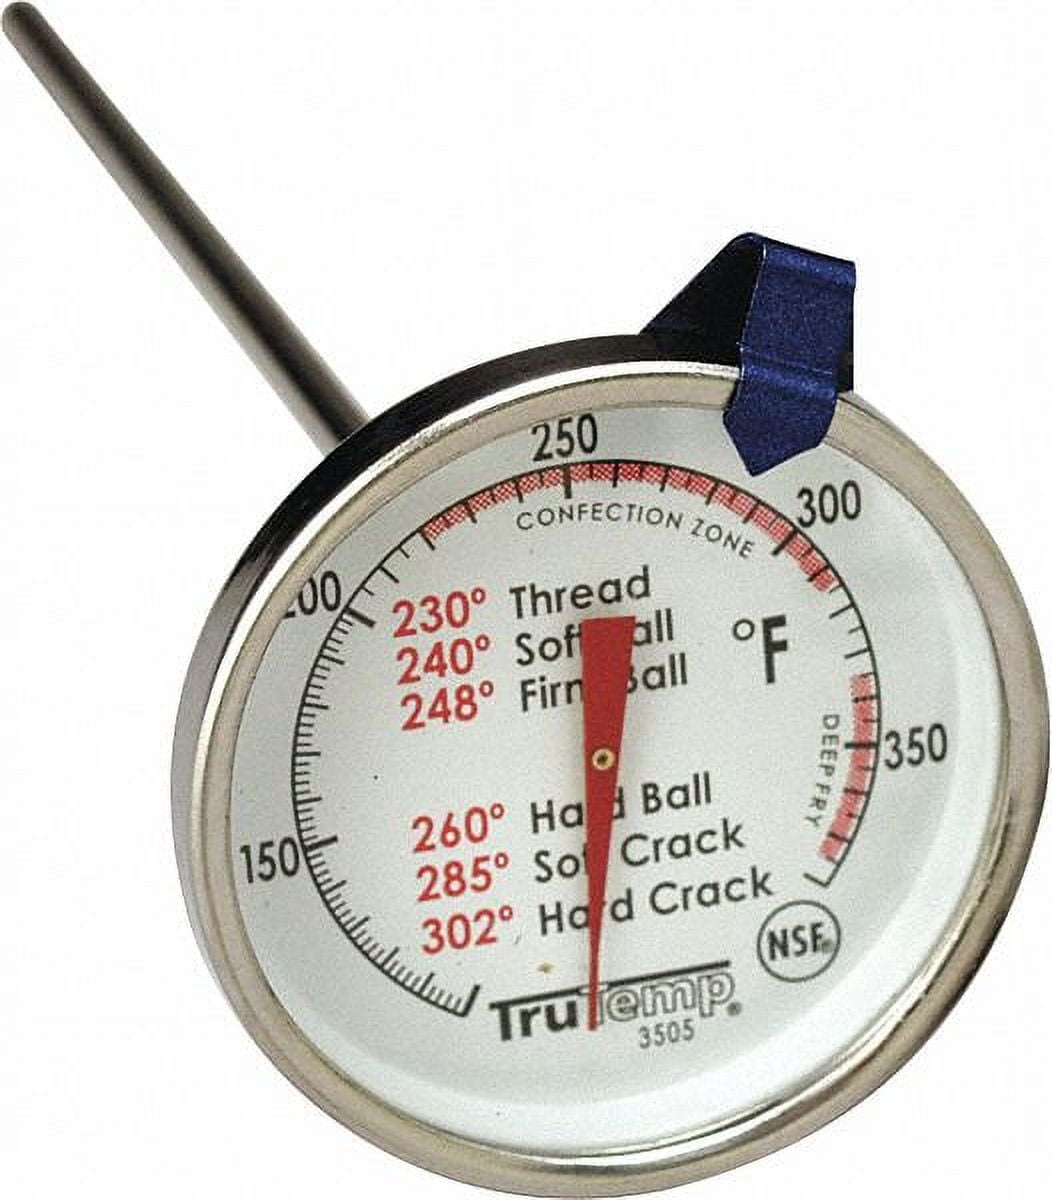 Taylor 5911 N Classic Series Candy And Deep Fry Thermometer: Kitchen  Thermometers (077784059111-2)